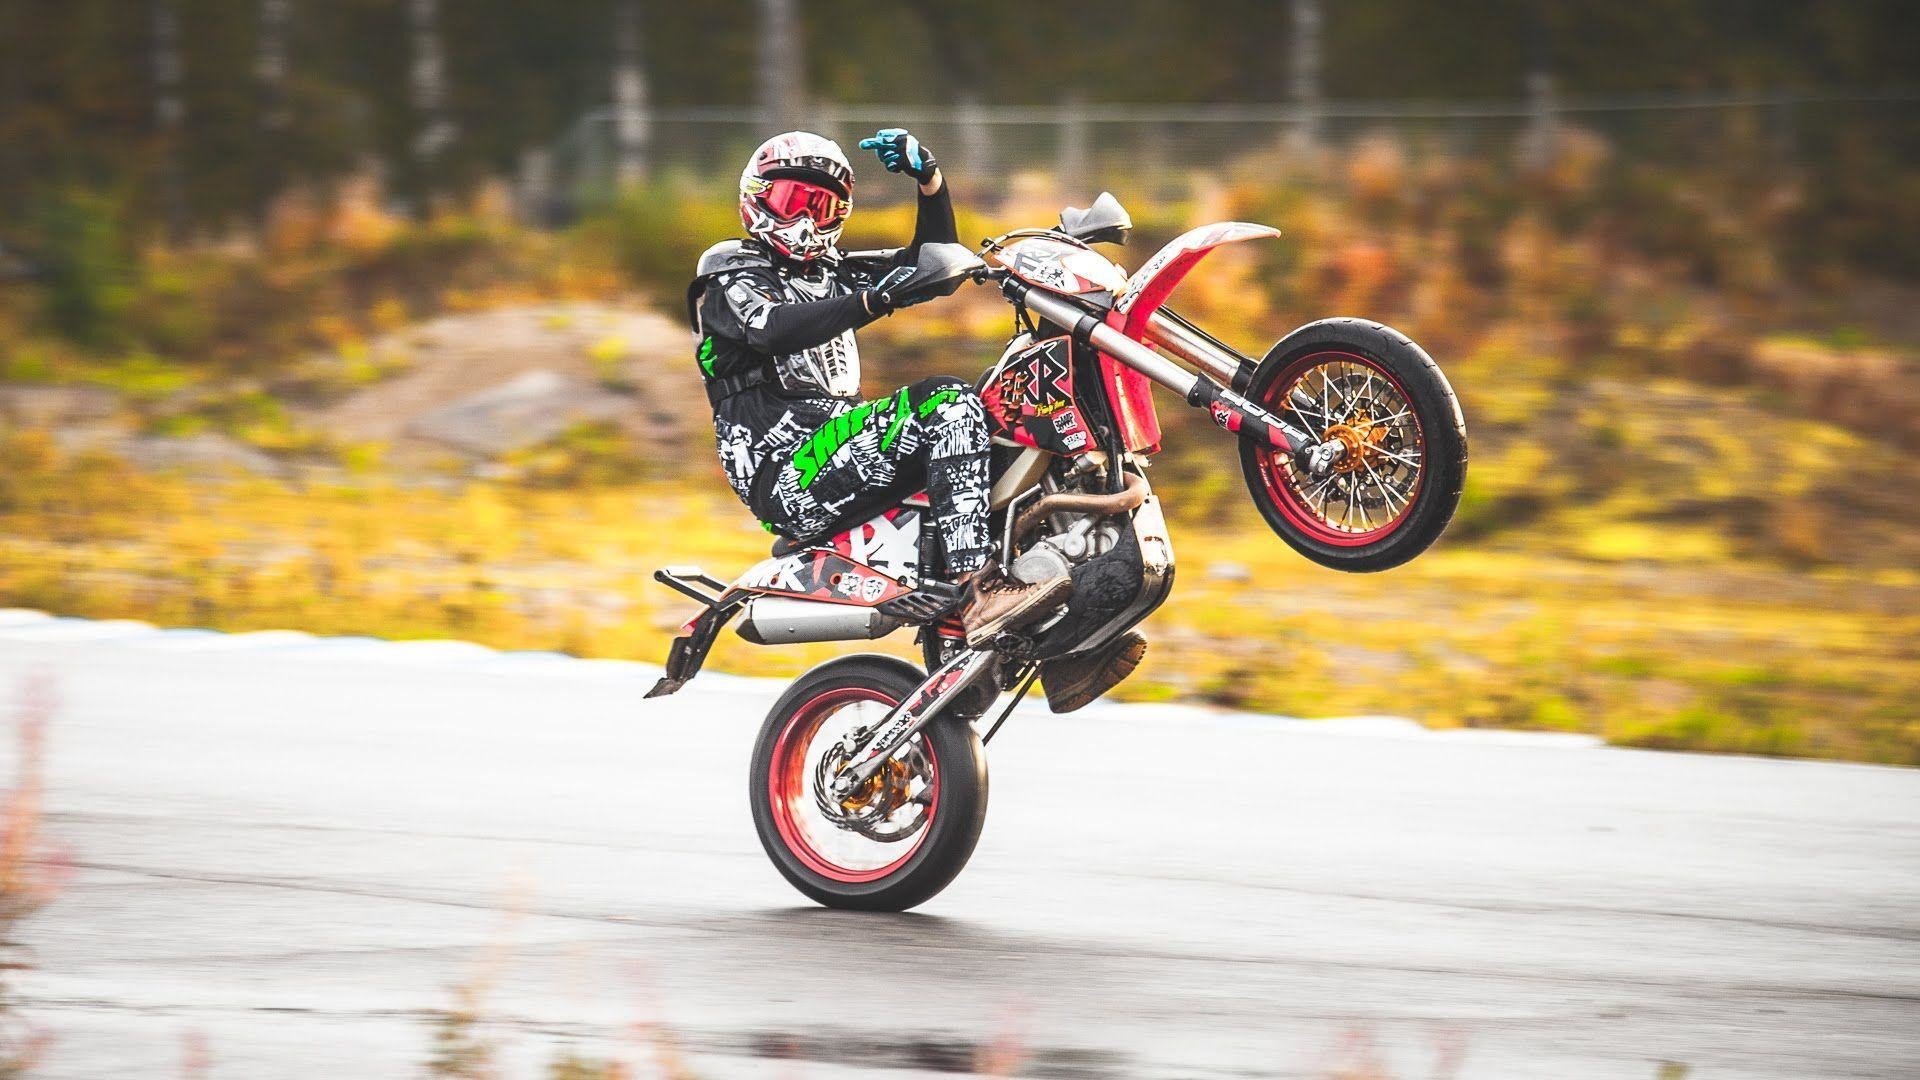 Supermoto Wallpaper Posted By Michelle Cunningham